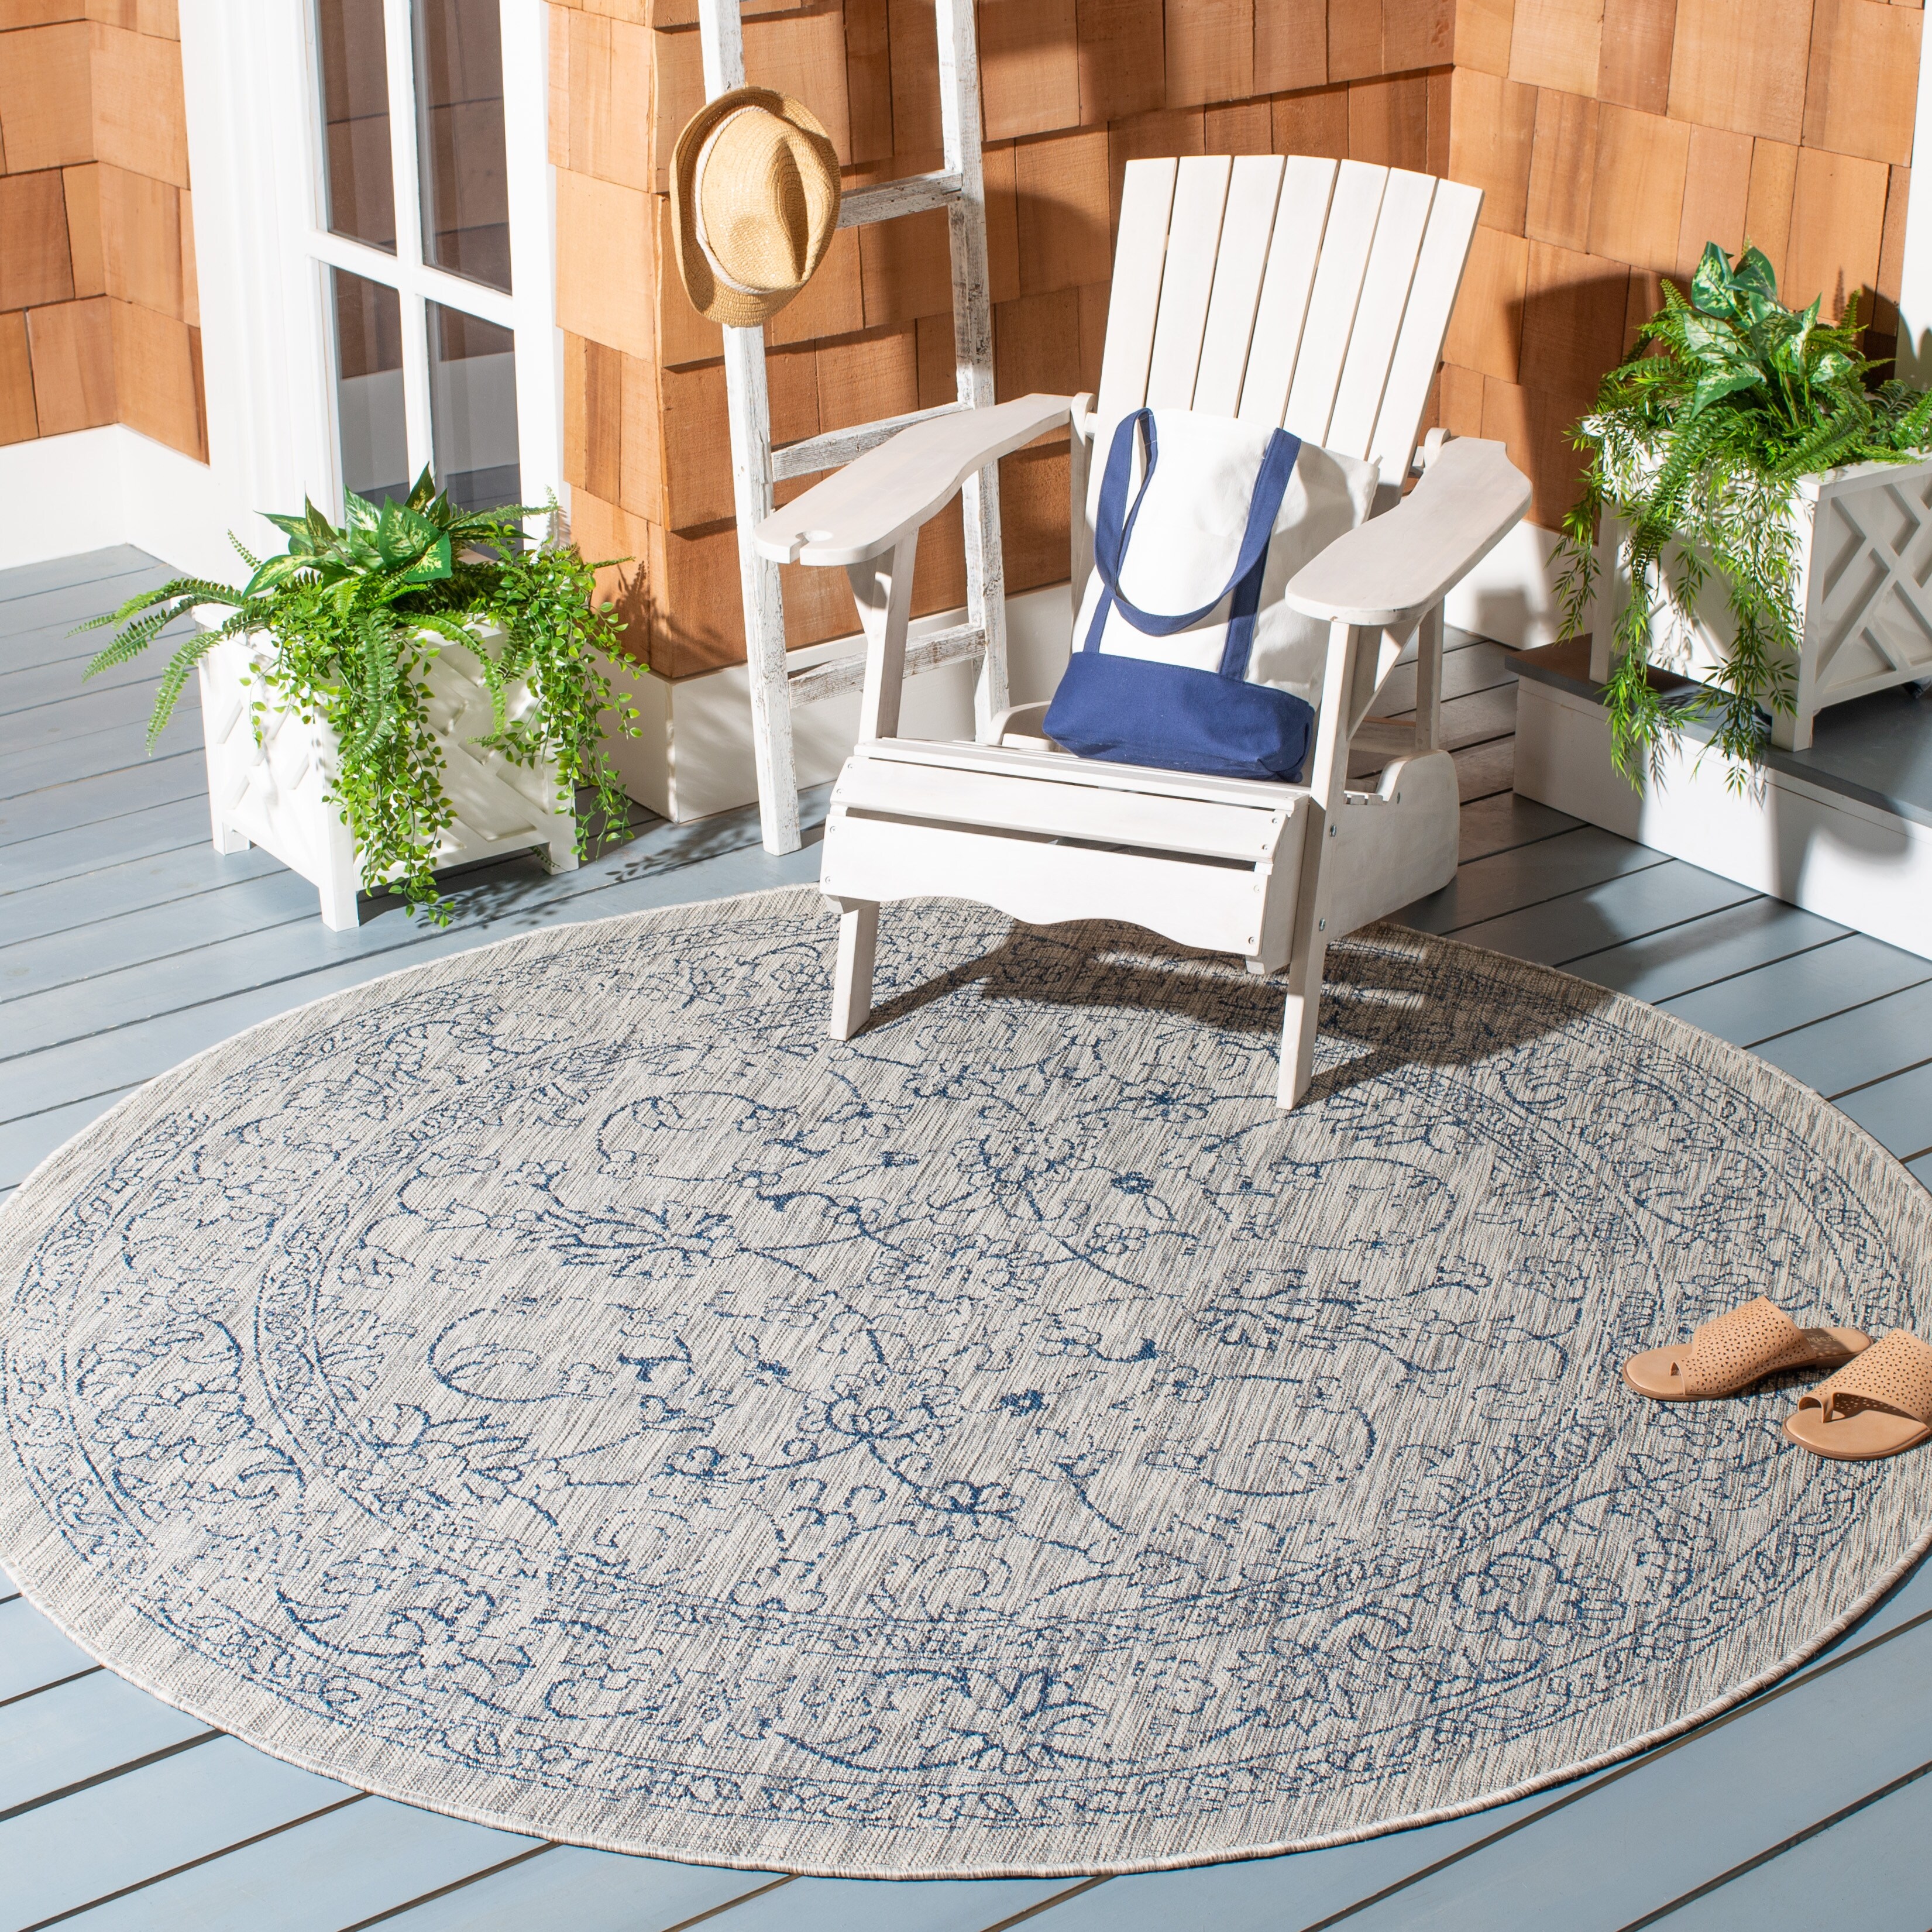 https://ak1.ostkcdn.com/images/products/is/images/direct/c236cd7454f38a702021389a8bf86b98f96fe04c/SAFAVIEH-Courtyard-Indoor--Outdoor-Patio-Backyard-Rug.jpg